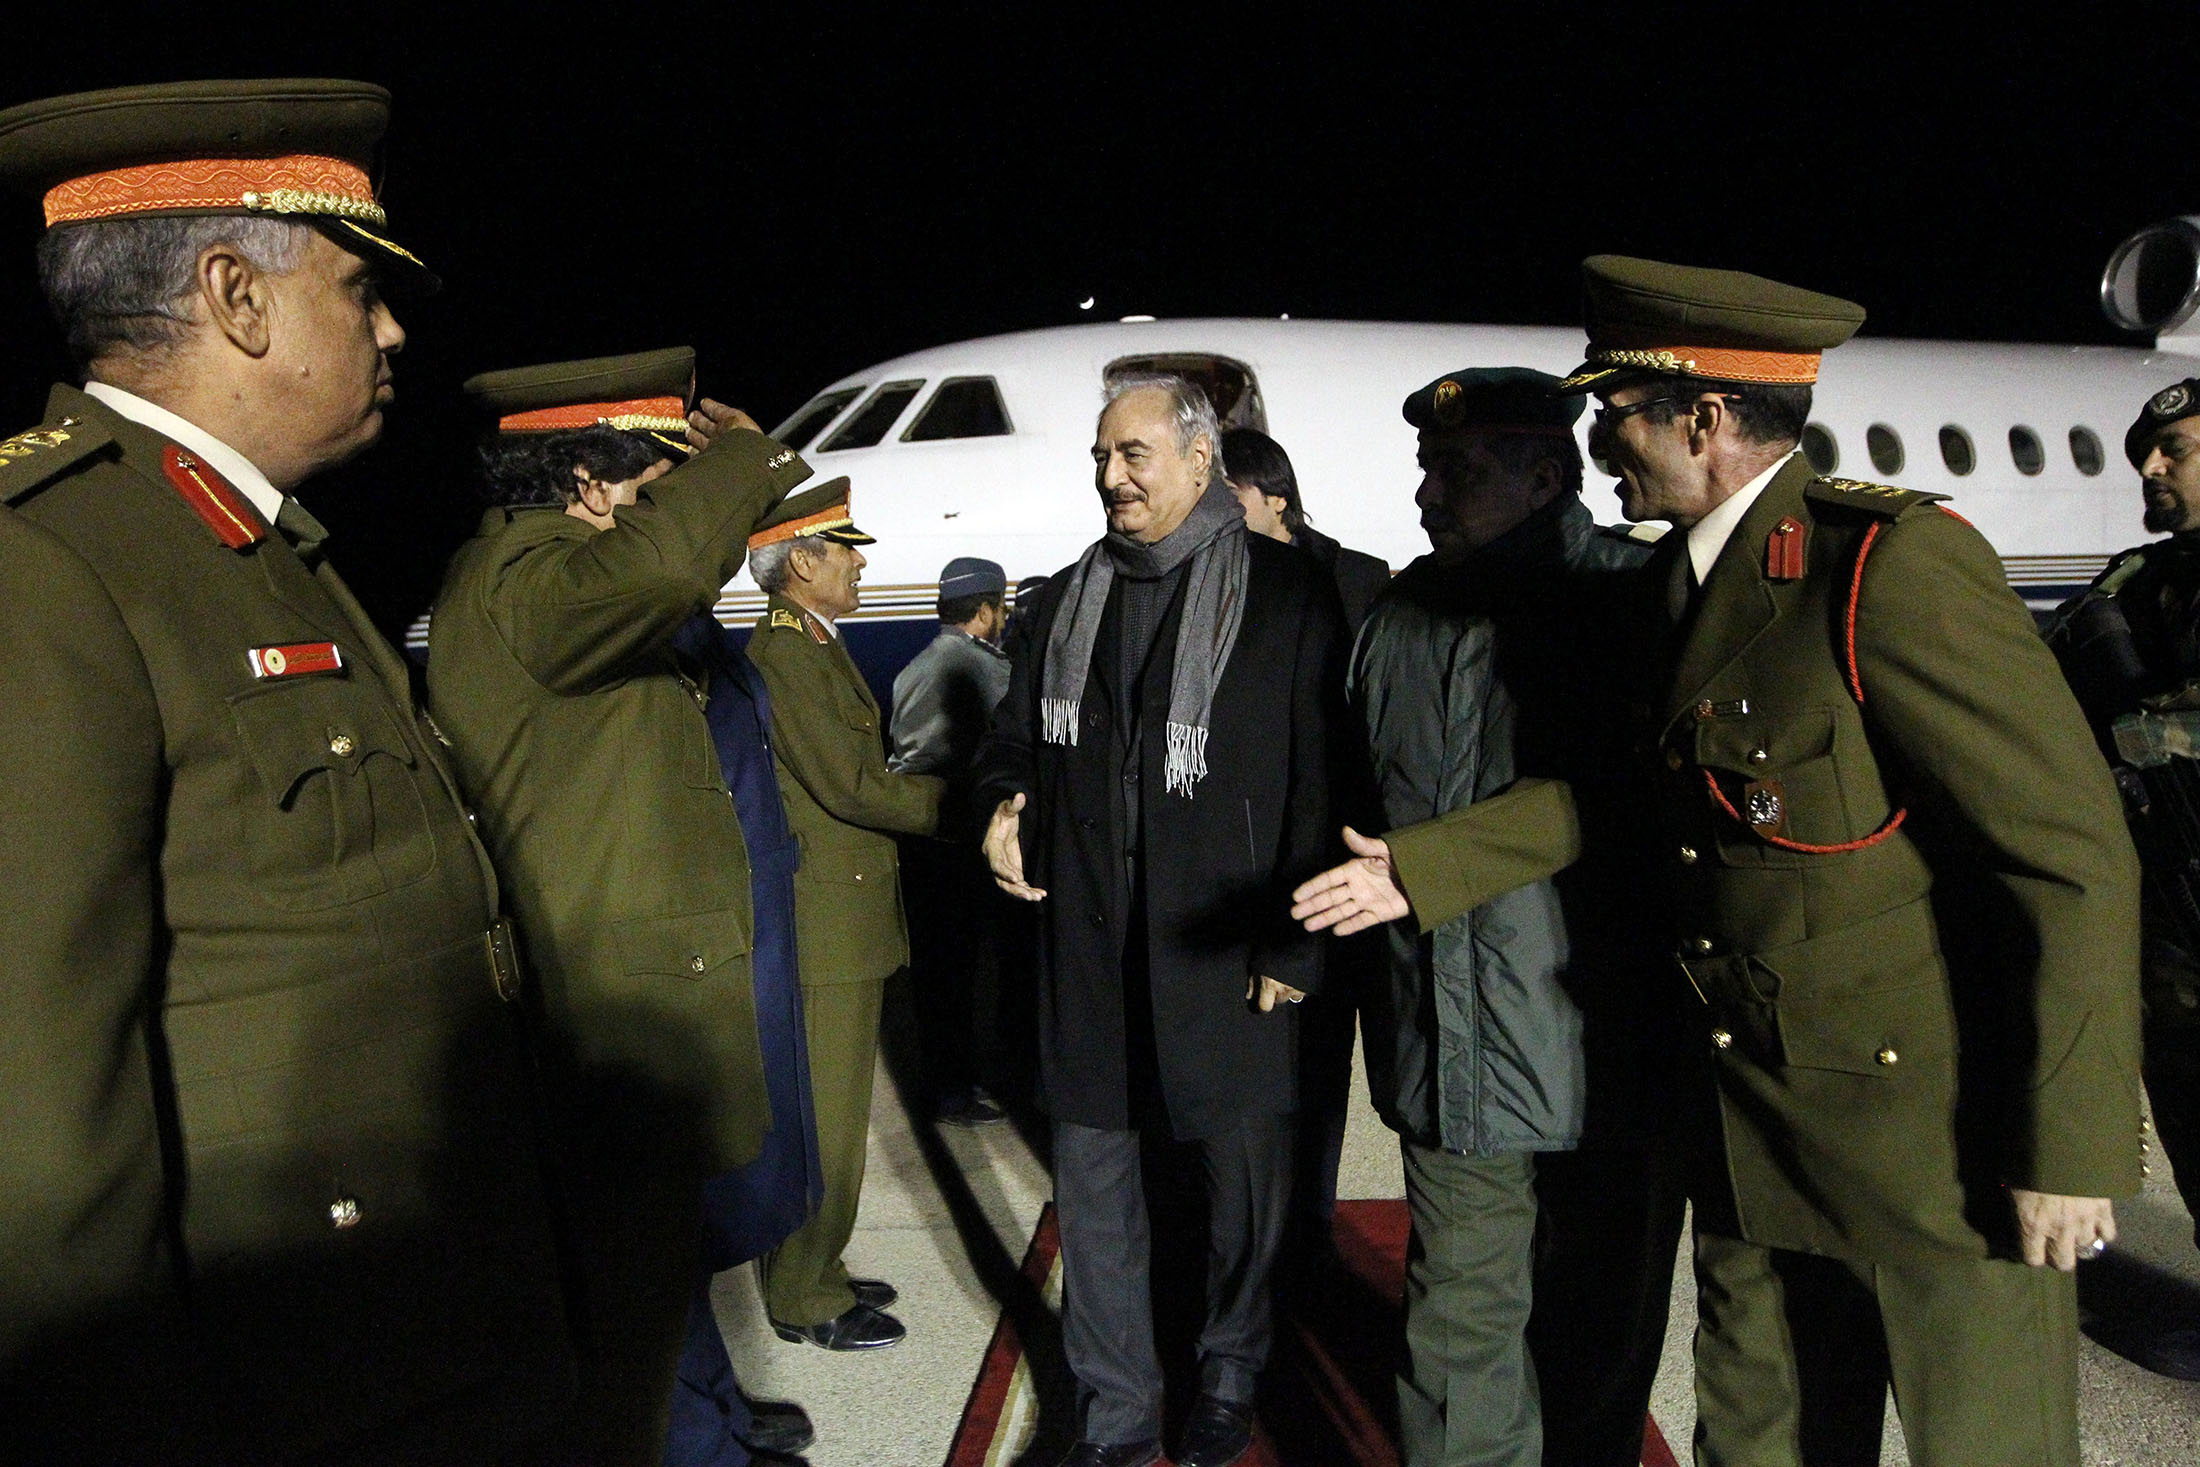 General Khalifa Haftar, center, commander of the armed forces loyal to the internationally recognised Libyan government, is greeted upon his arrival at Al-Kharouba airport south of the town of al-Marj on Dec. 3, 2016.
